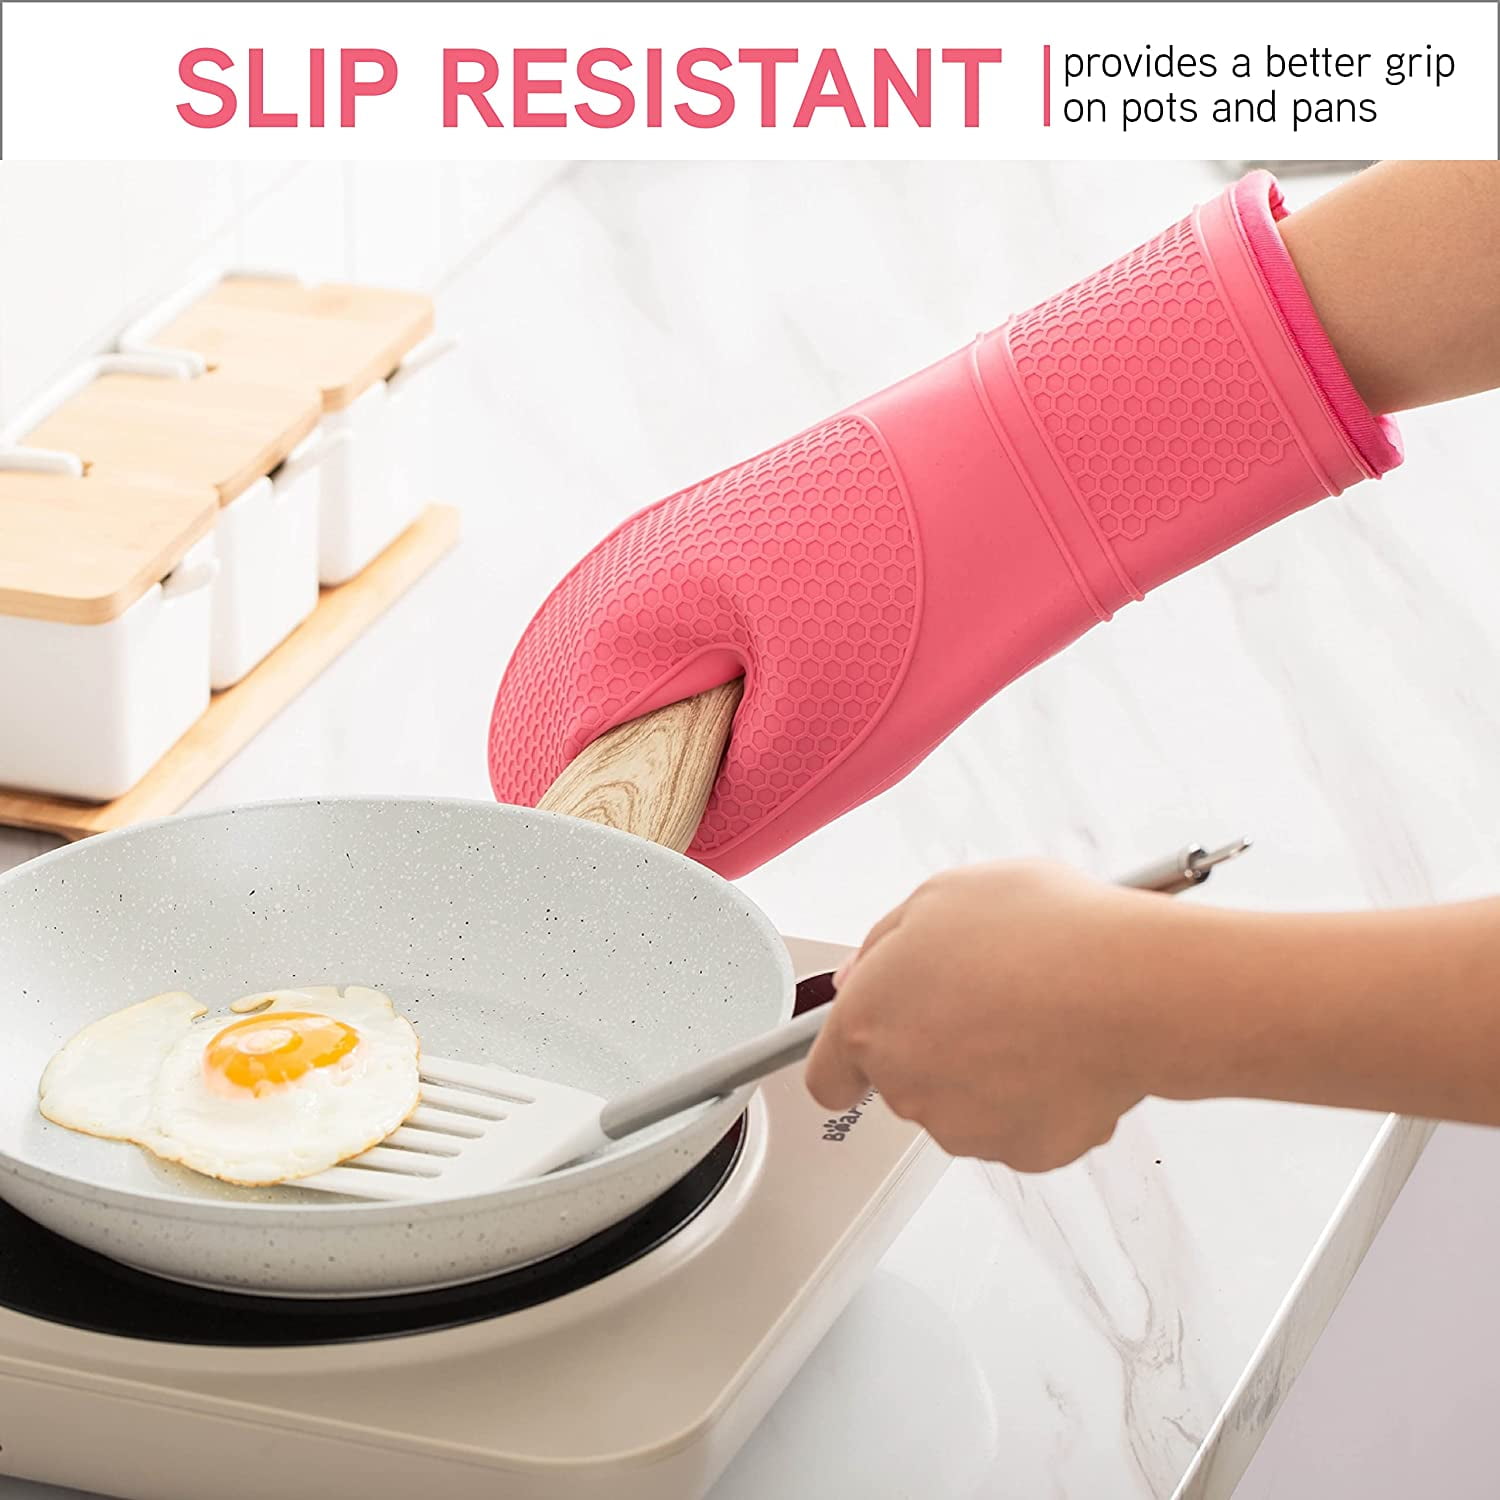 Oven Mitts Heat Resistant – (Pink Color) Mini Oven Mitts, Silicone Gloves  Heat Resistant, Kitchen Gloves for Cooking, Silicone Oven Mitts & Pot